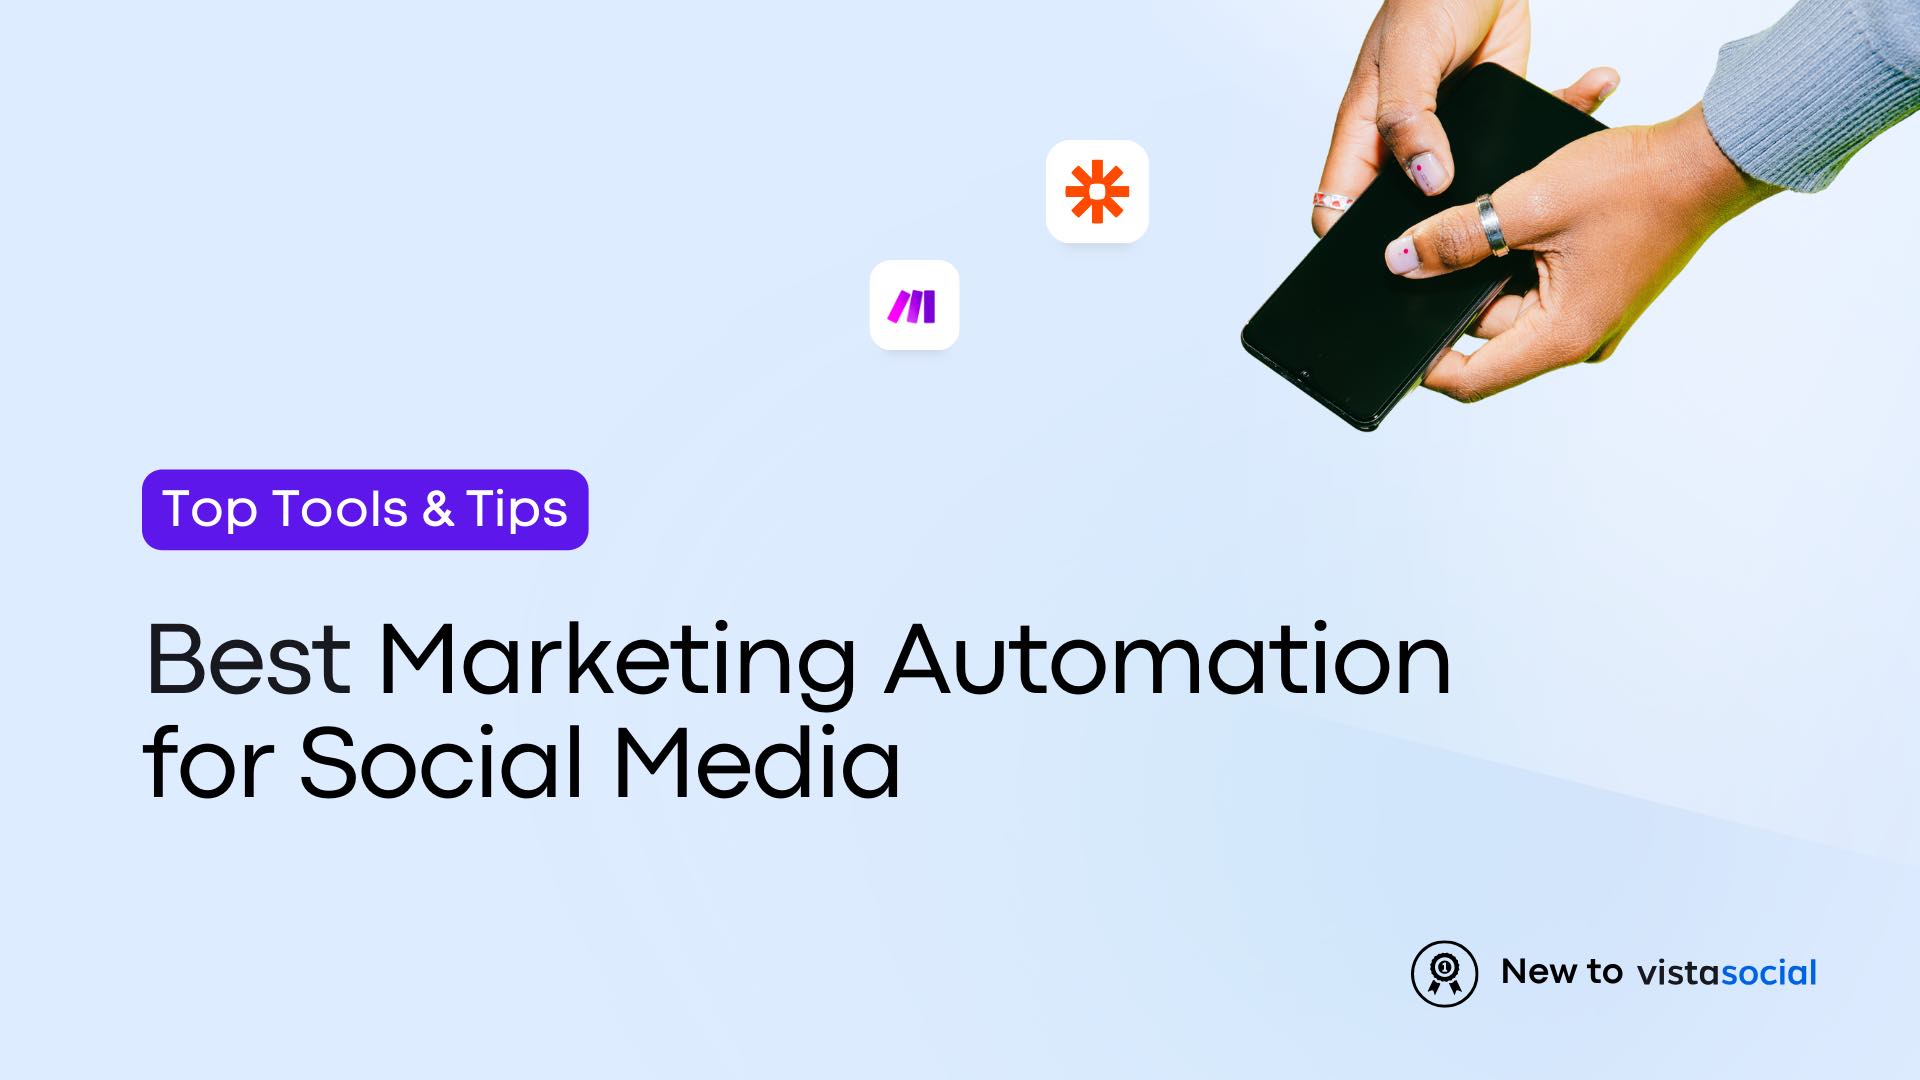 Best Marketing Automation for Social Media: Top Tools and Tips - 11